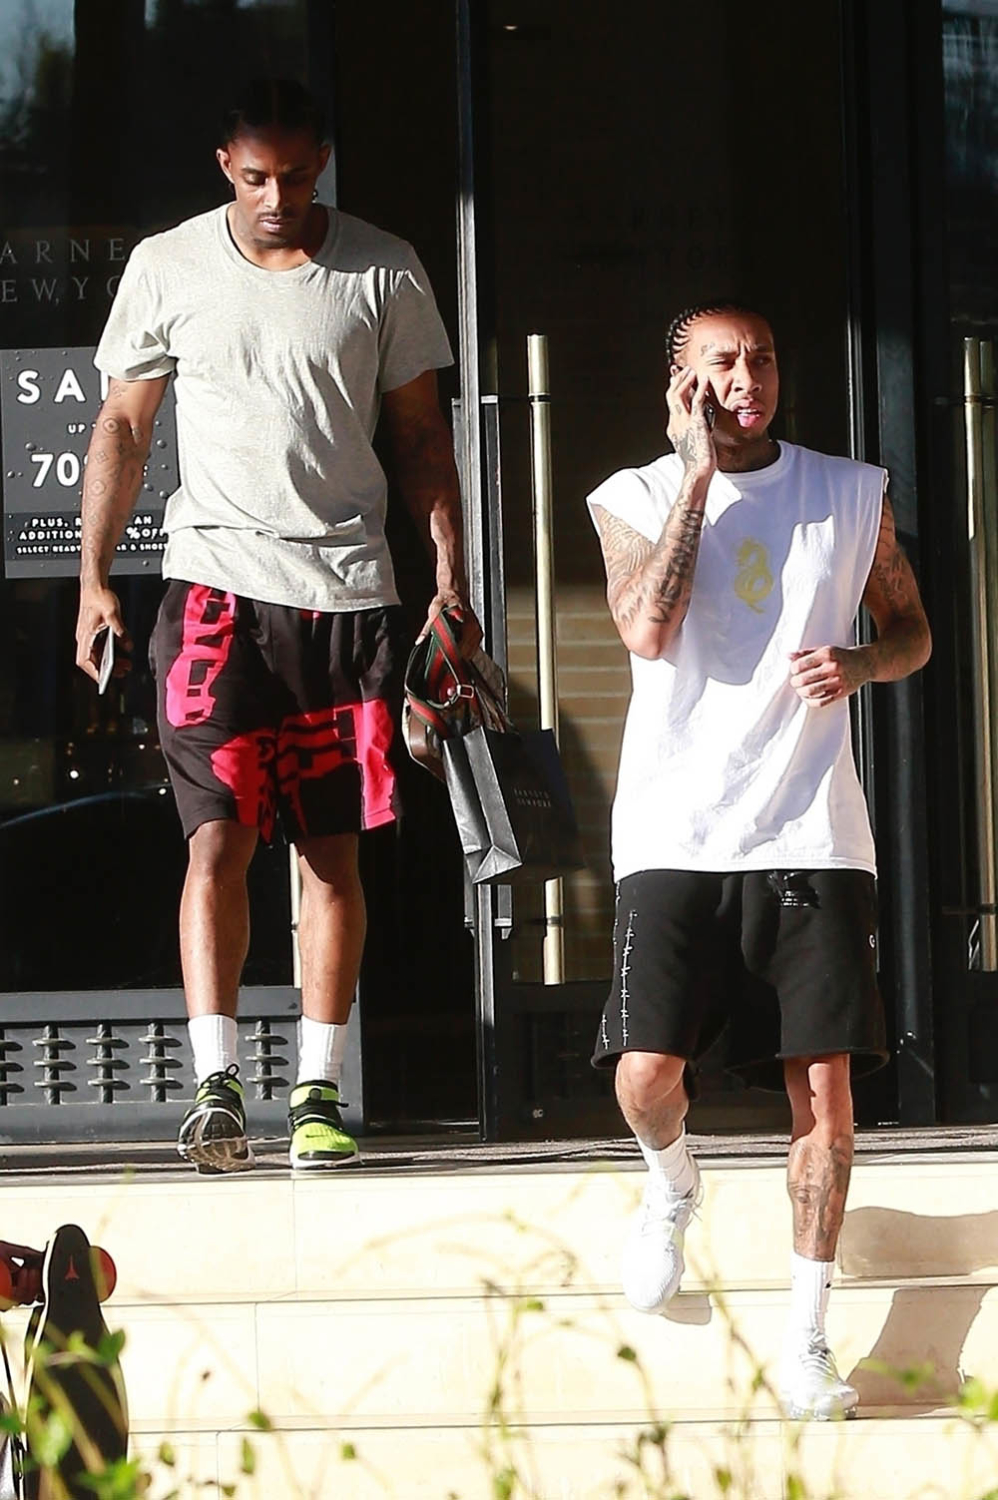 Tyga looked casual as he leaves Barneys New York with a friend